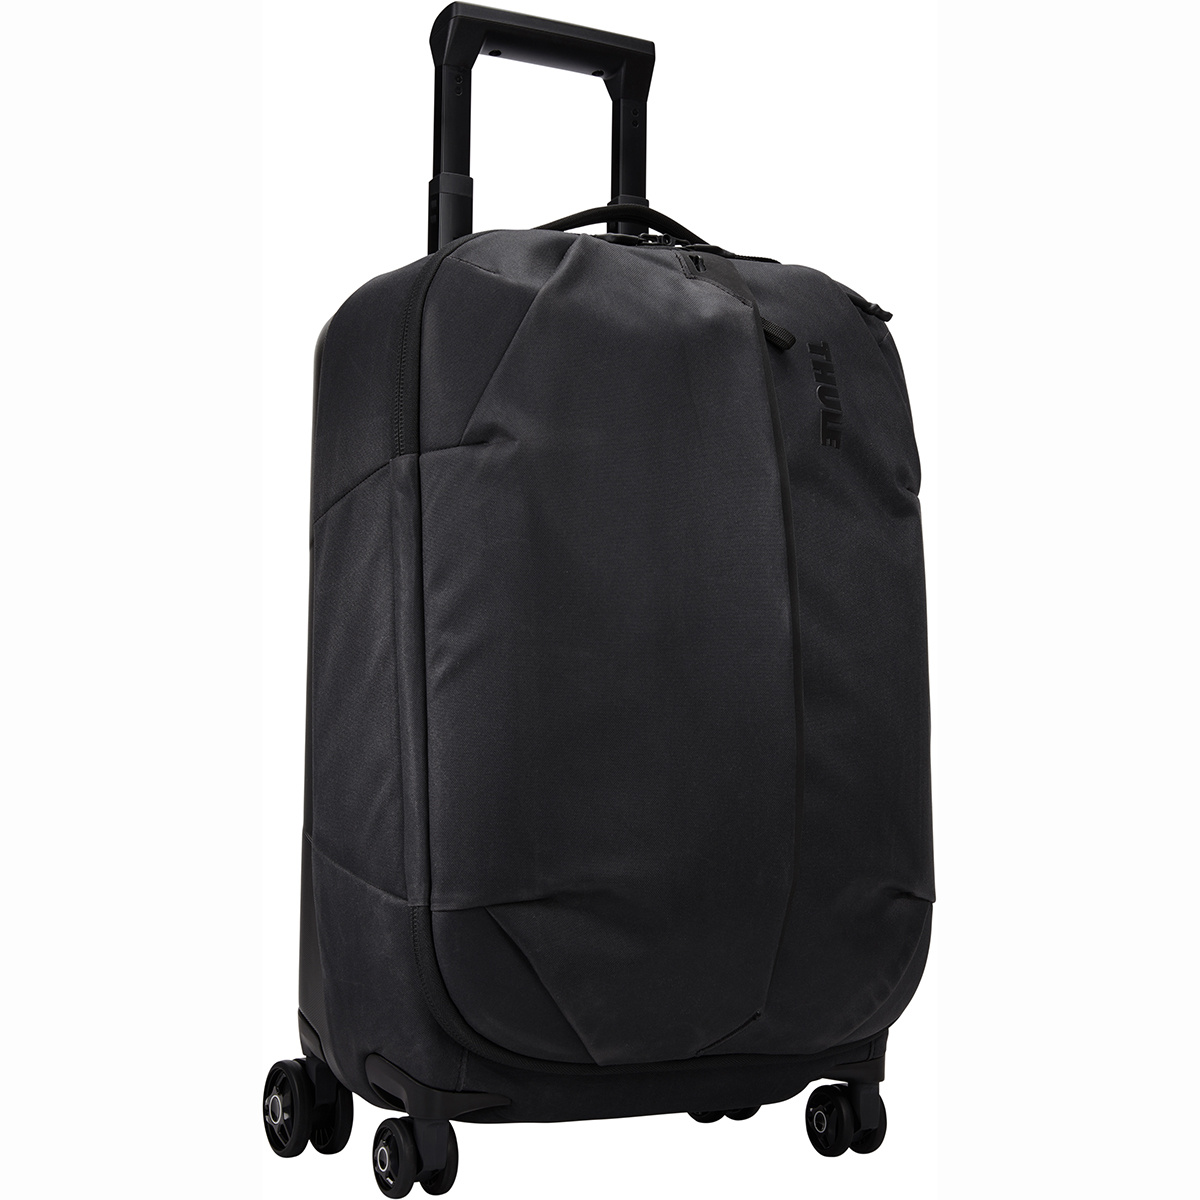 Thule Aion Carry on Rollkoffer von Thule